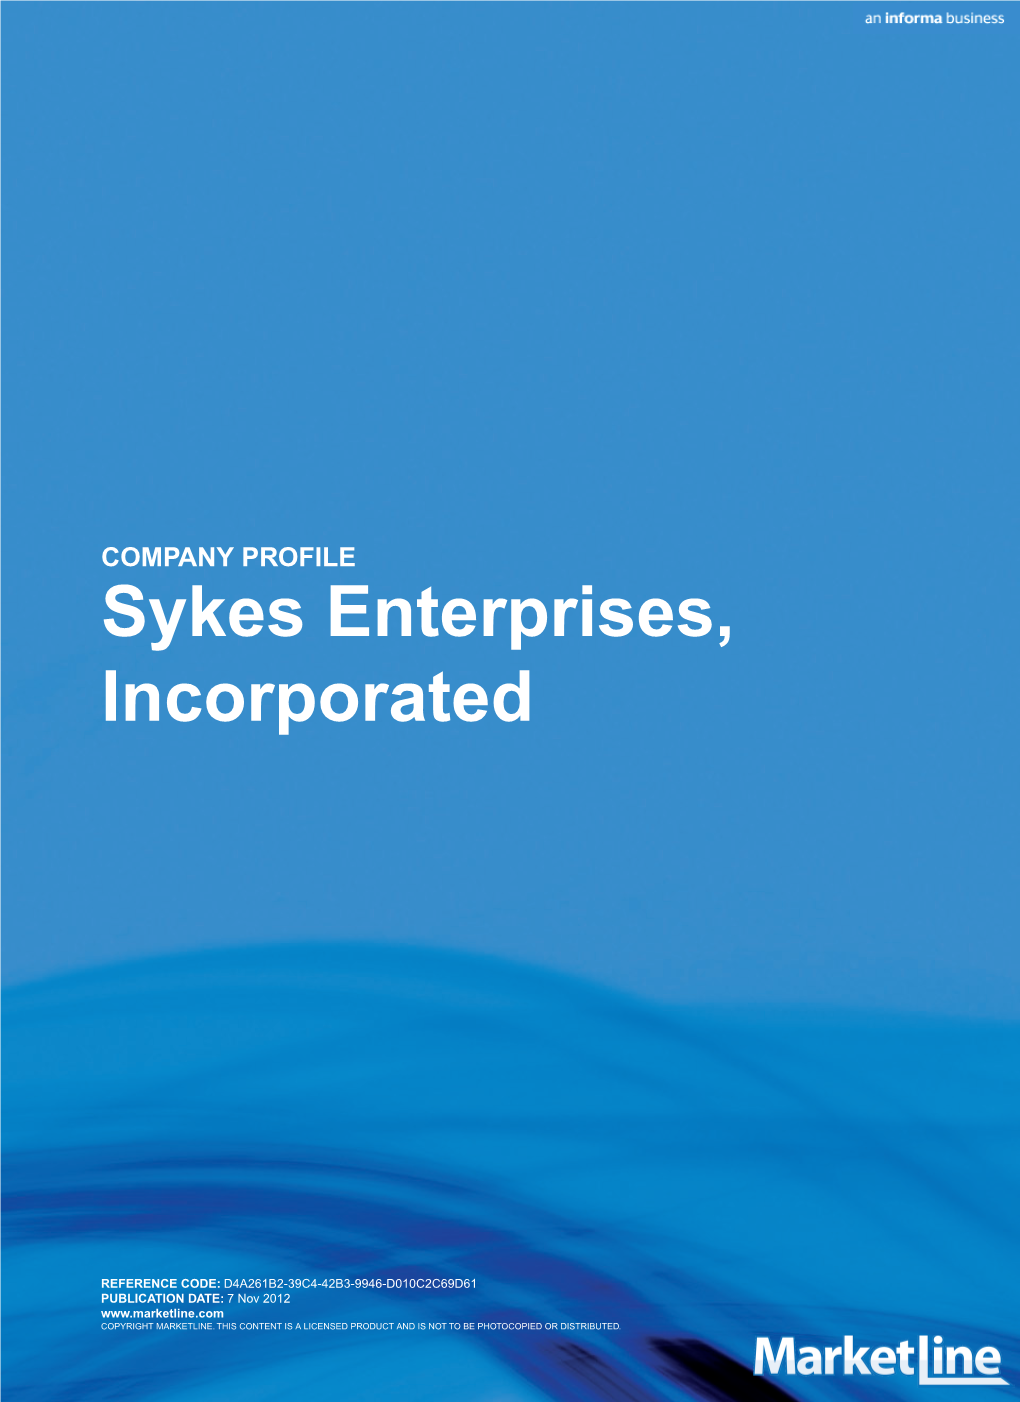 Sykes Enterprises, Incorporated